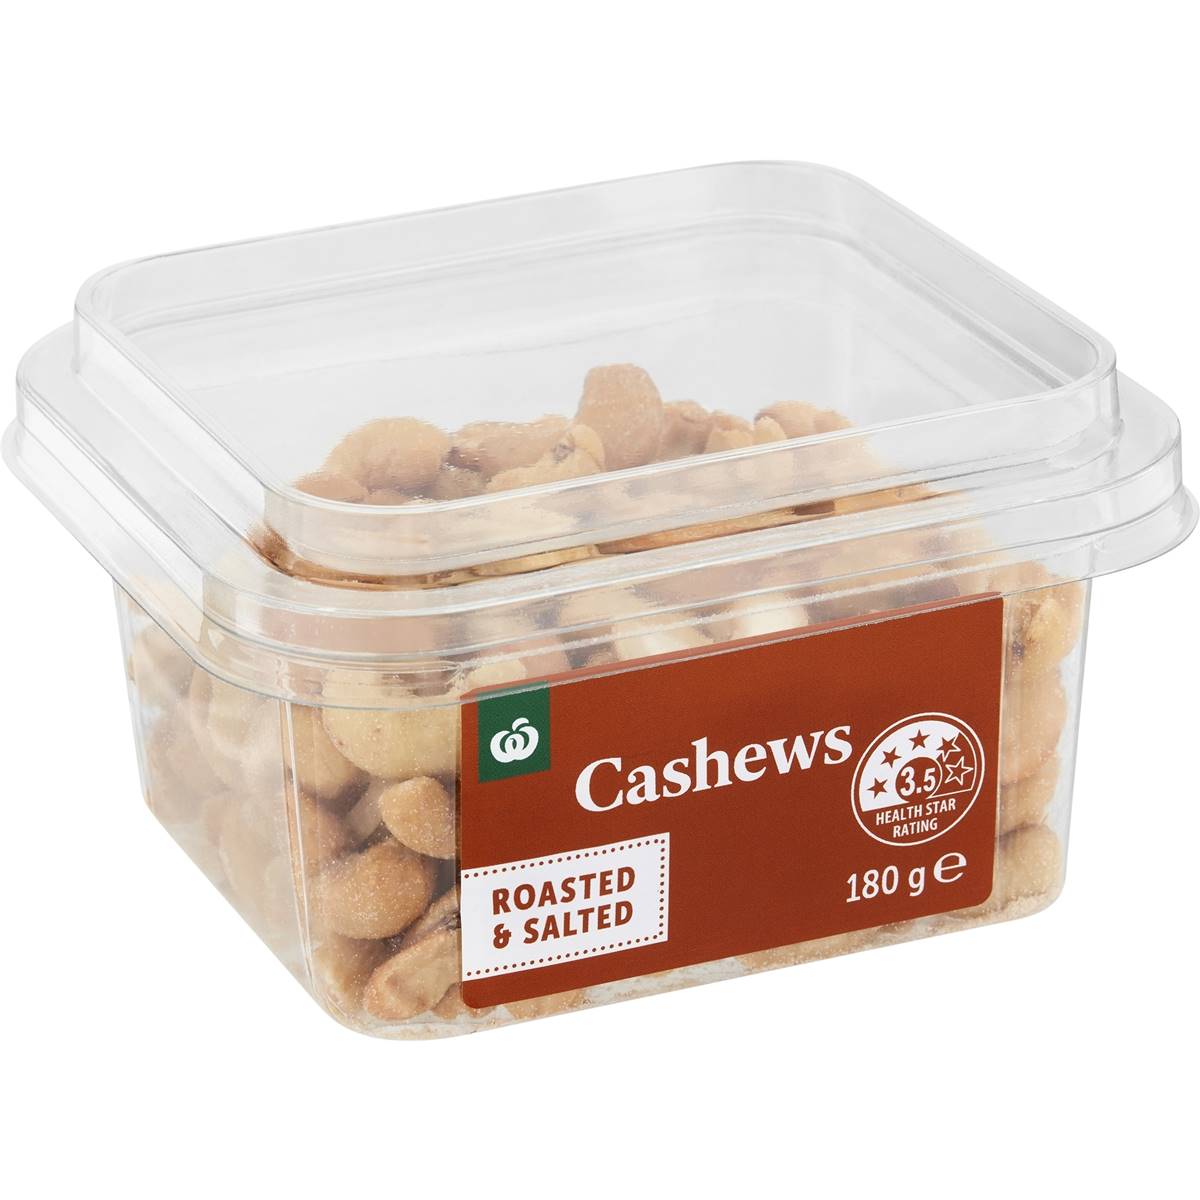 Calories in Woolworths Cashew Roasted & Salted Snack Pots